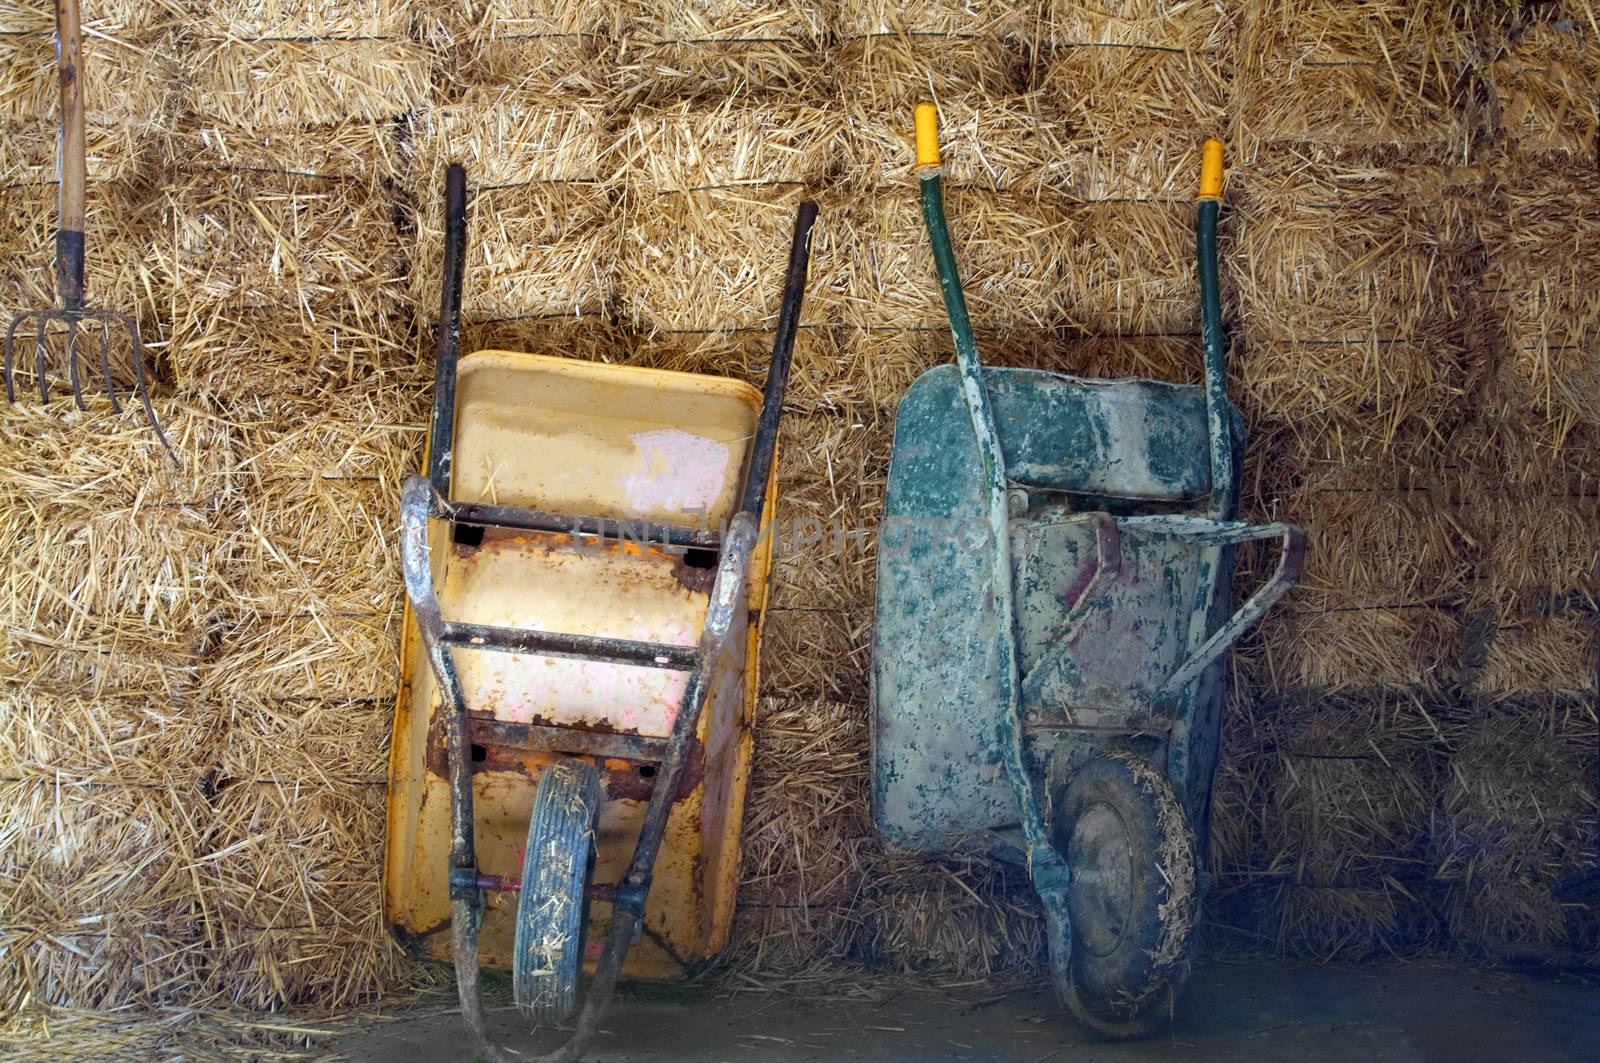 Two old wheelbarrows on the hay background, farm